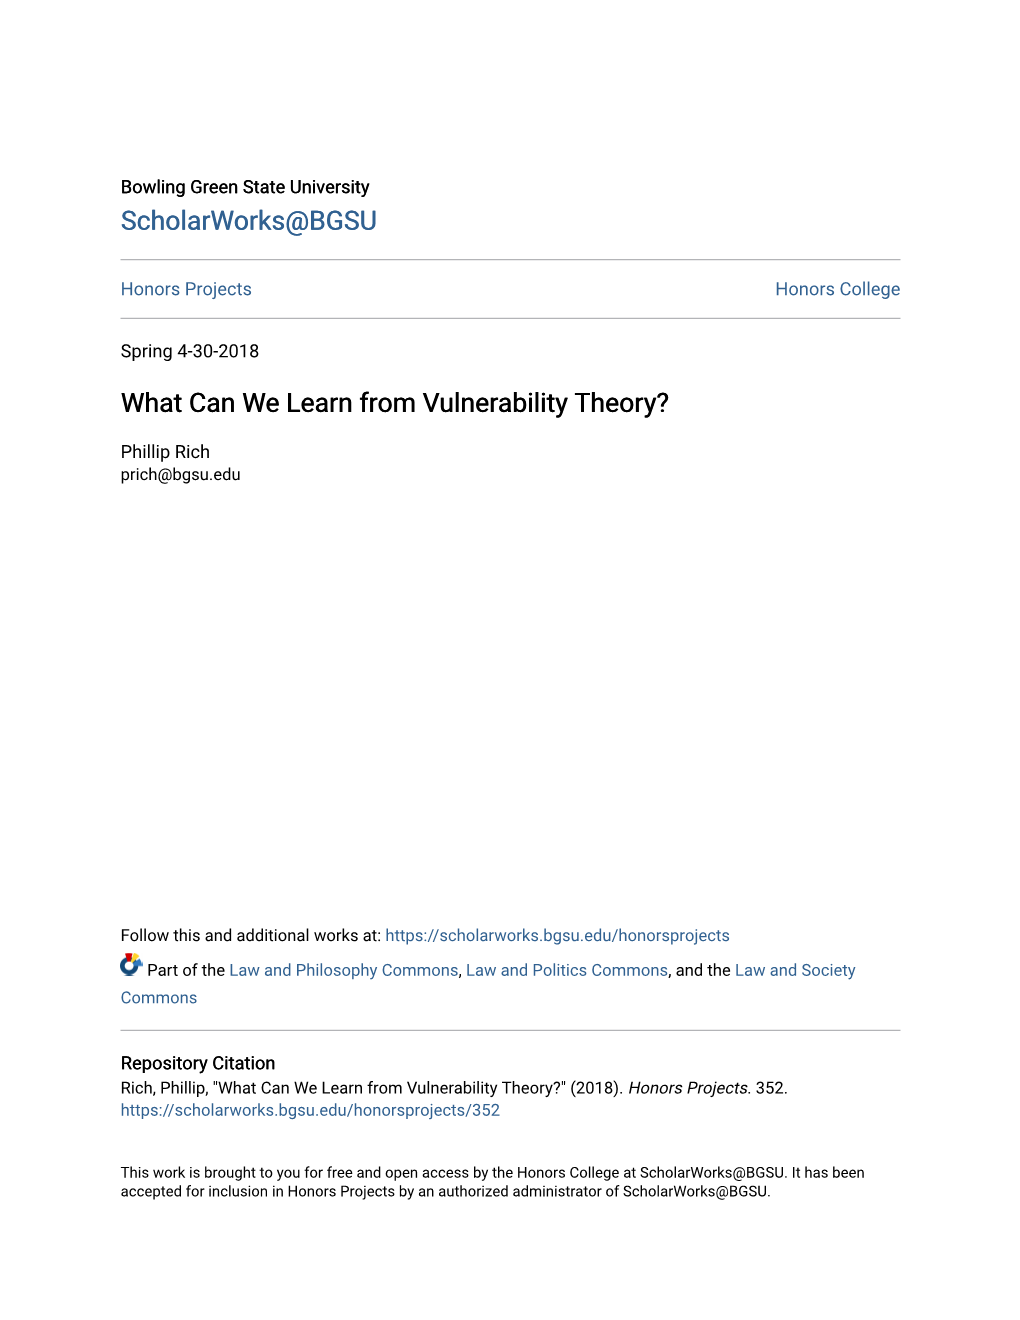 What Can We Learn from Vulnerability Theory?